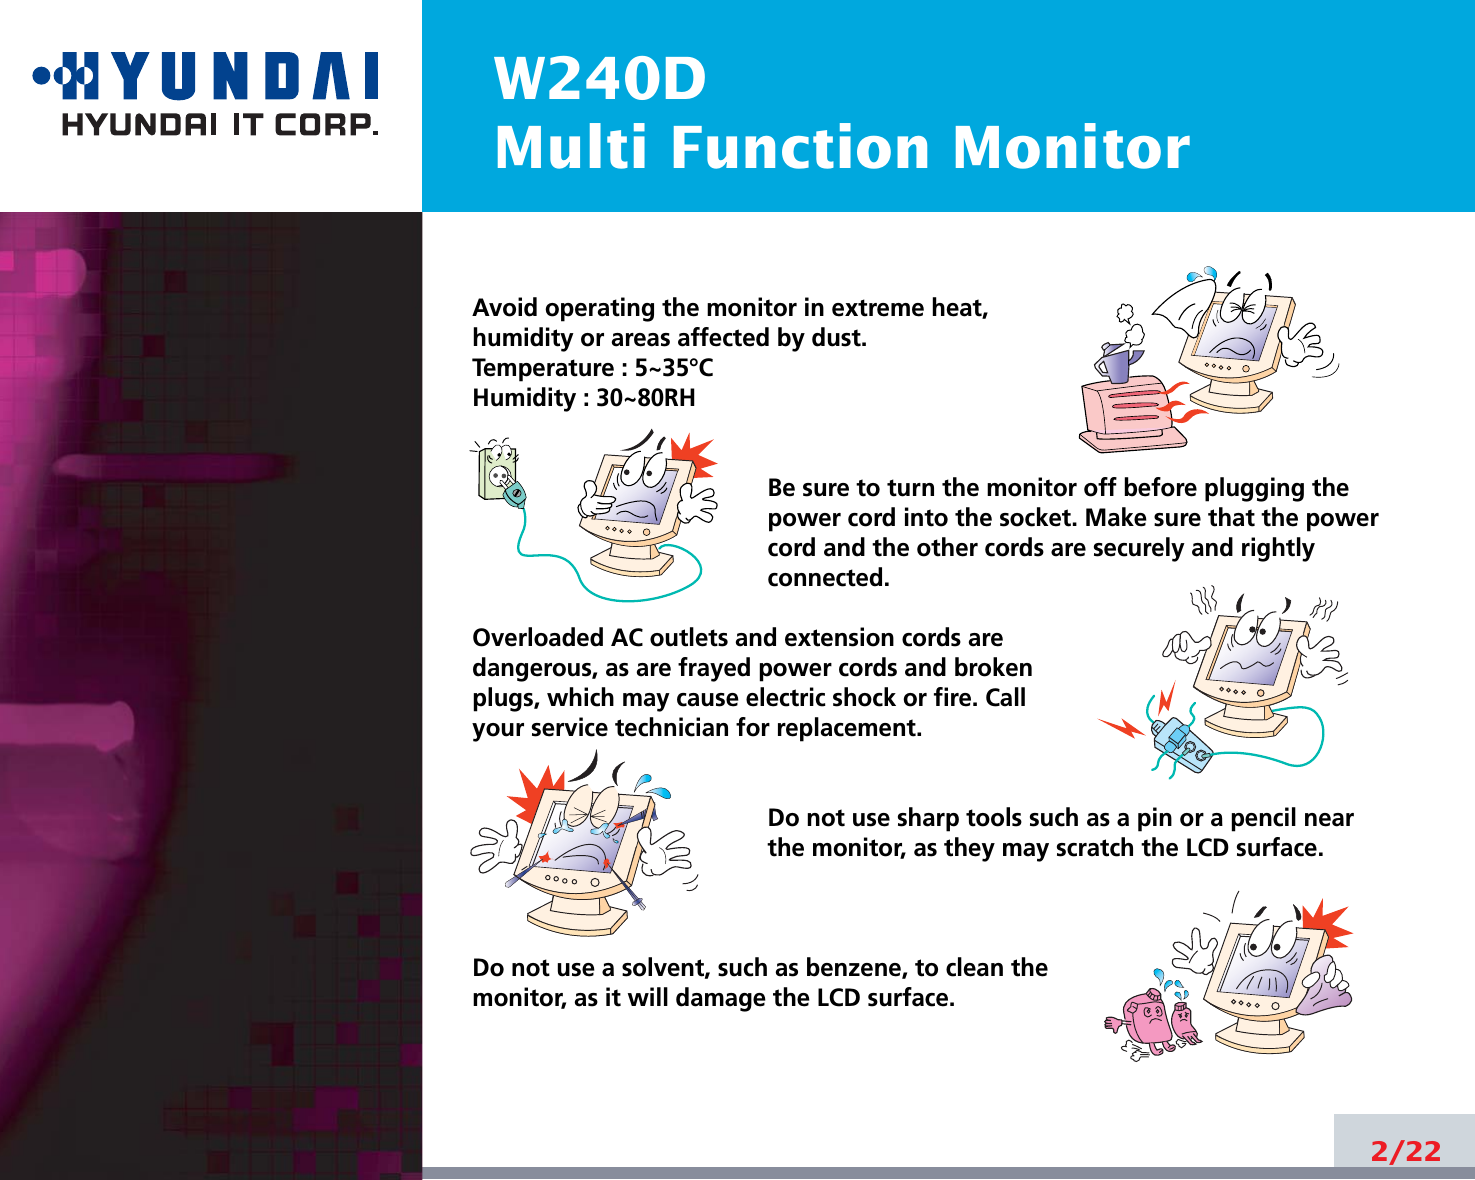 W240DMulti Function Monitor2/22Avoid operating the monitor in extreme heat, humidity or areas affected by dust. Temperature : 5~35°CHumidity : 30~80RH Be sure to turn the monitor off before plugging thepower cord into the socket. Make sure that the powercord and the other cords are securely and rightlyconnected.Overloaded AC outlets and extension cords are dangerous, as are frayed power cords and broken plugs, which may cause electric shock or fire. Call your service technician for replacement.Do not use sharp tools such as a pin or a pencil near the monitor, as they may scratch the LCD surface.Do not use a solvent, such as benzene, to clean the monitor, as it will damage the LCD surface.